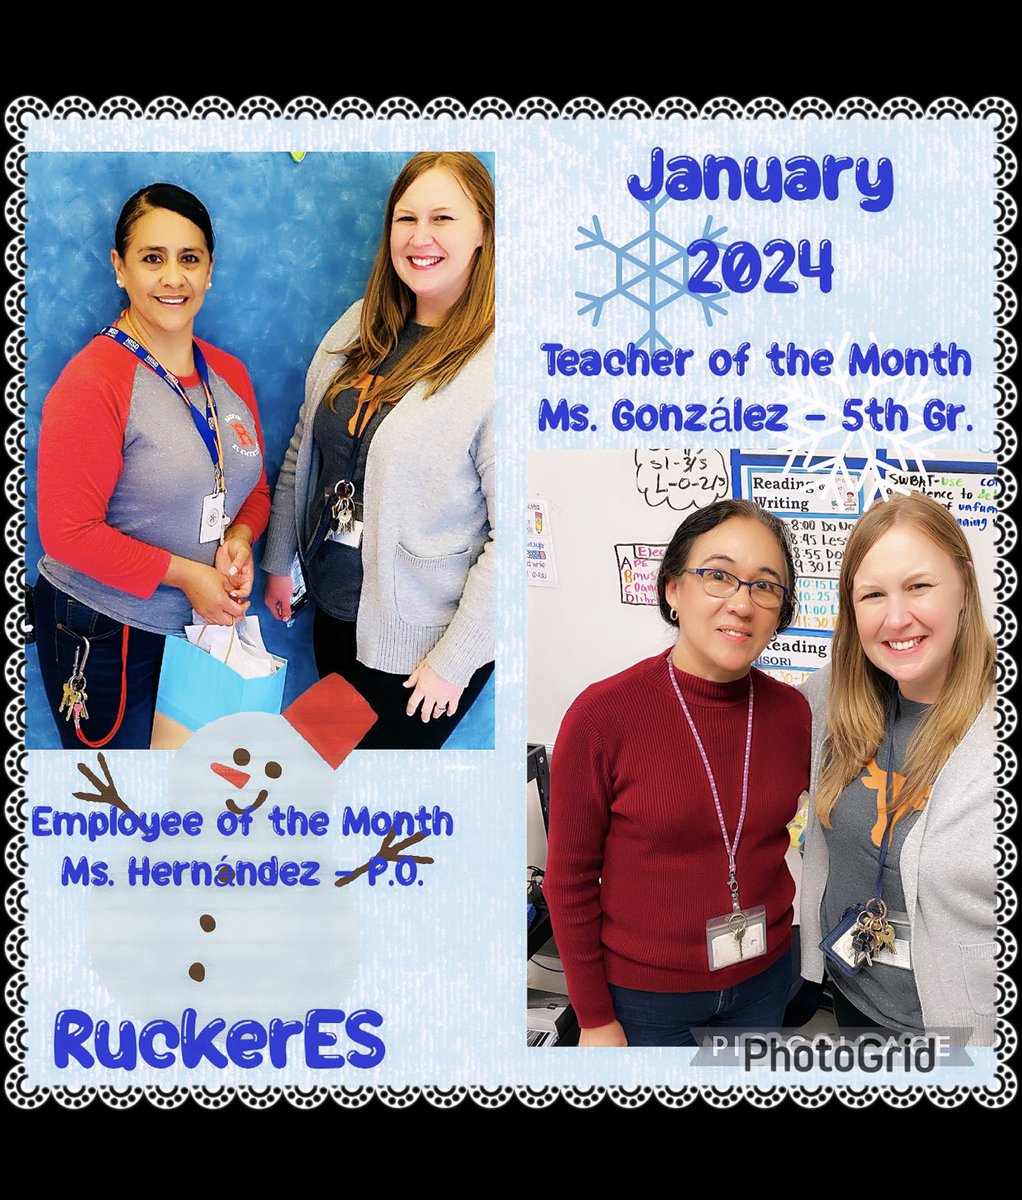 We are thrilled to recognize the outstanding performance of the Teacher and Employee of the Month for the month of January 2024 at @RuckerHISD! Their consistent excellence and unwavering commitment have earned them this recognition. Congratulations, Rucker Roadrunners! 🙌👏💐😊